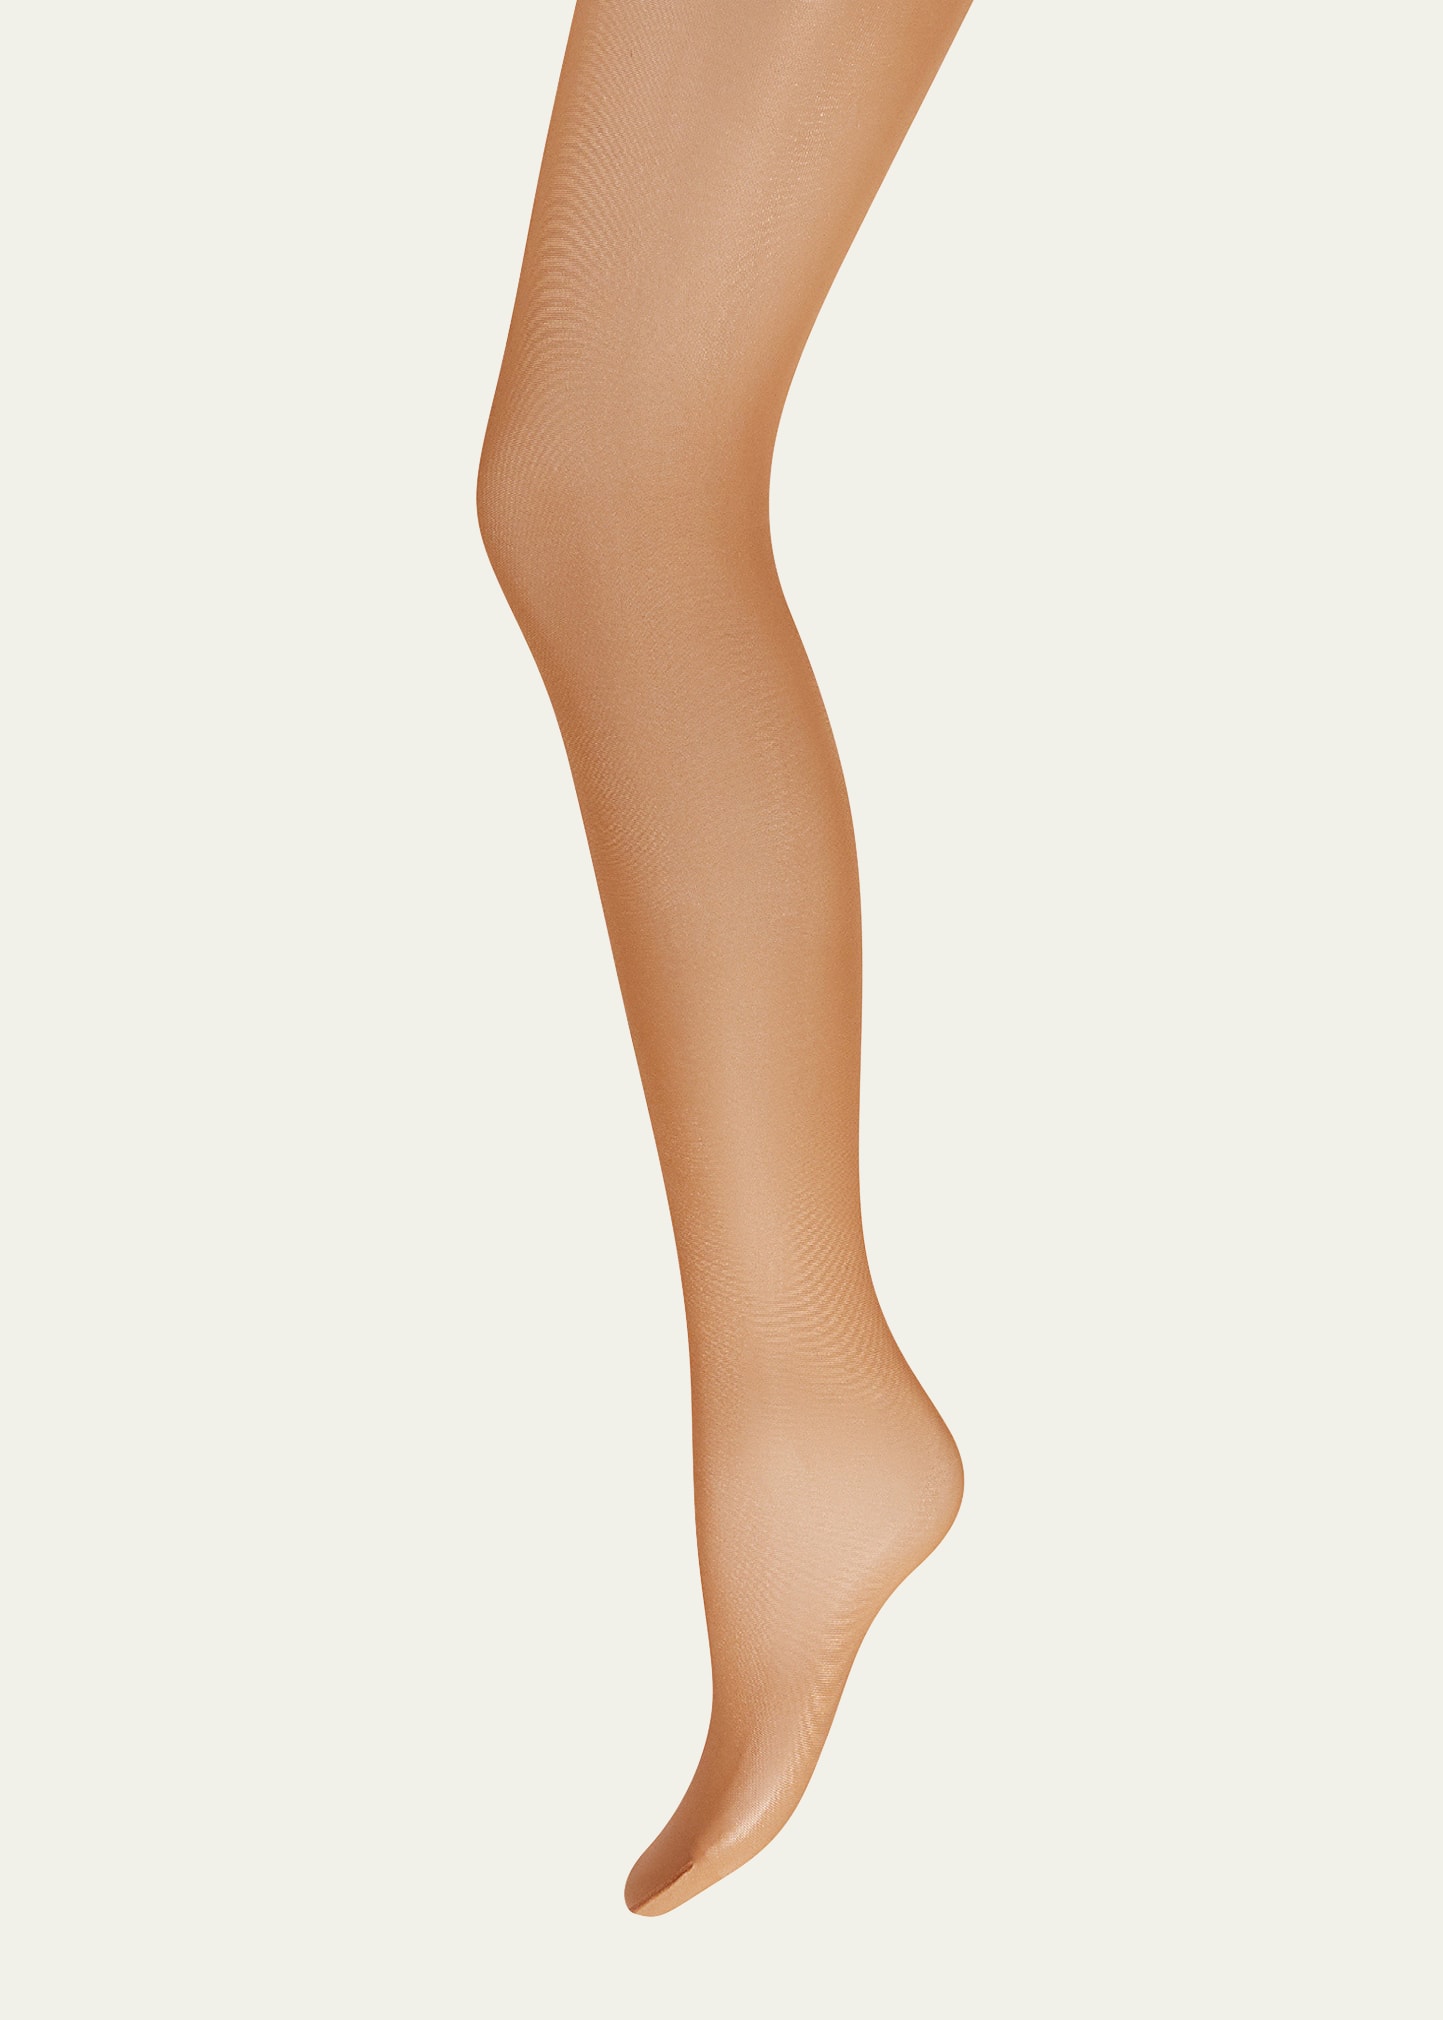 WOLFORD NEON 40 GLOSSY TIGHTS